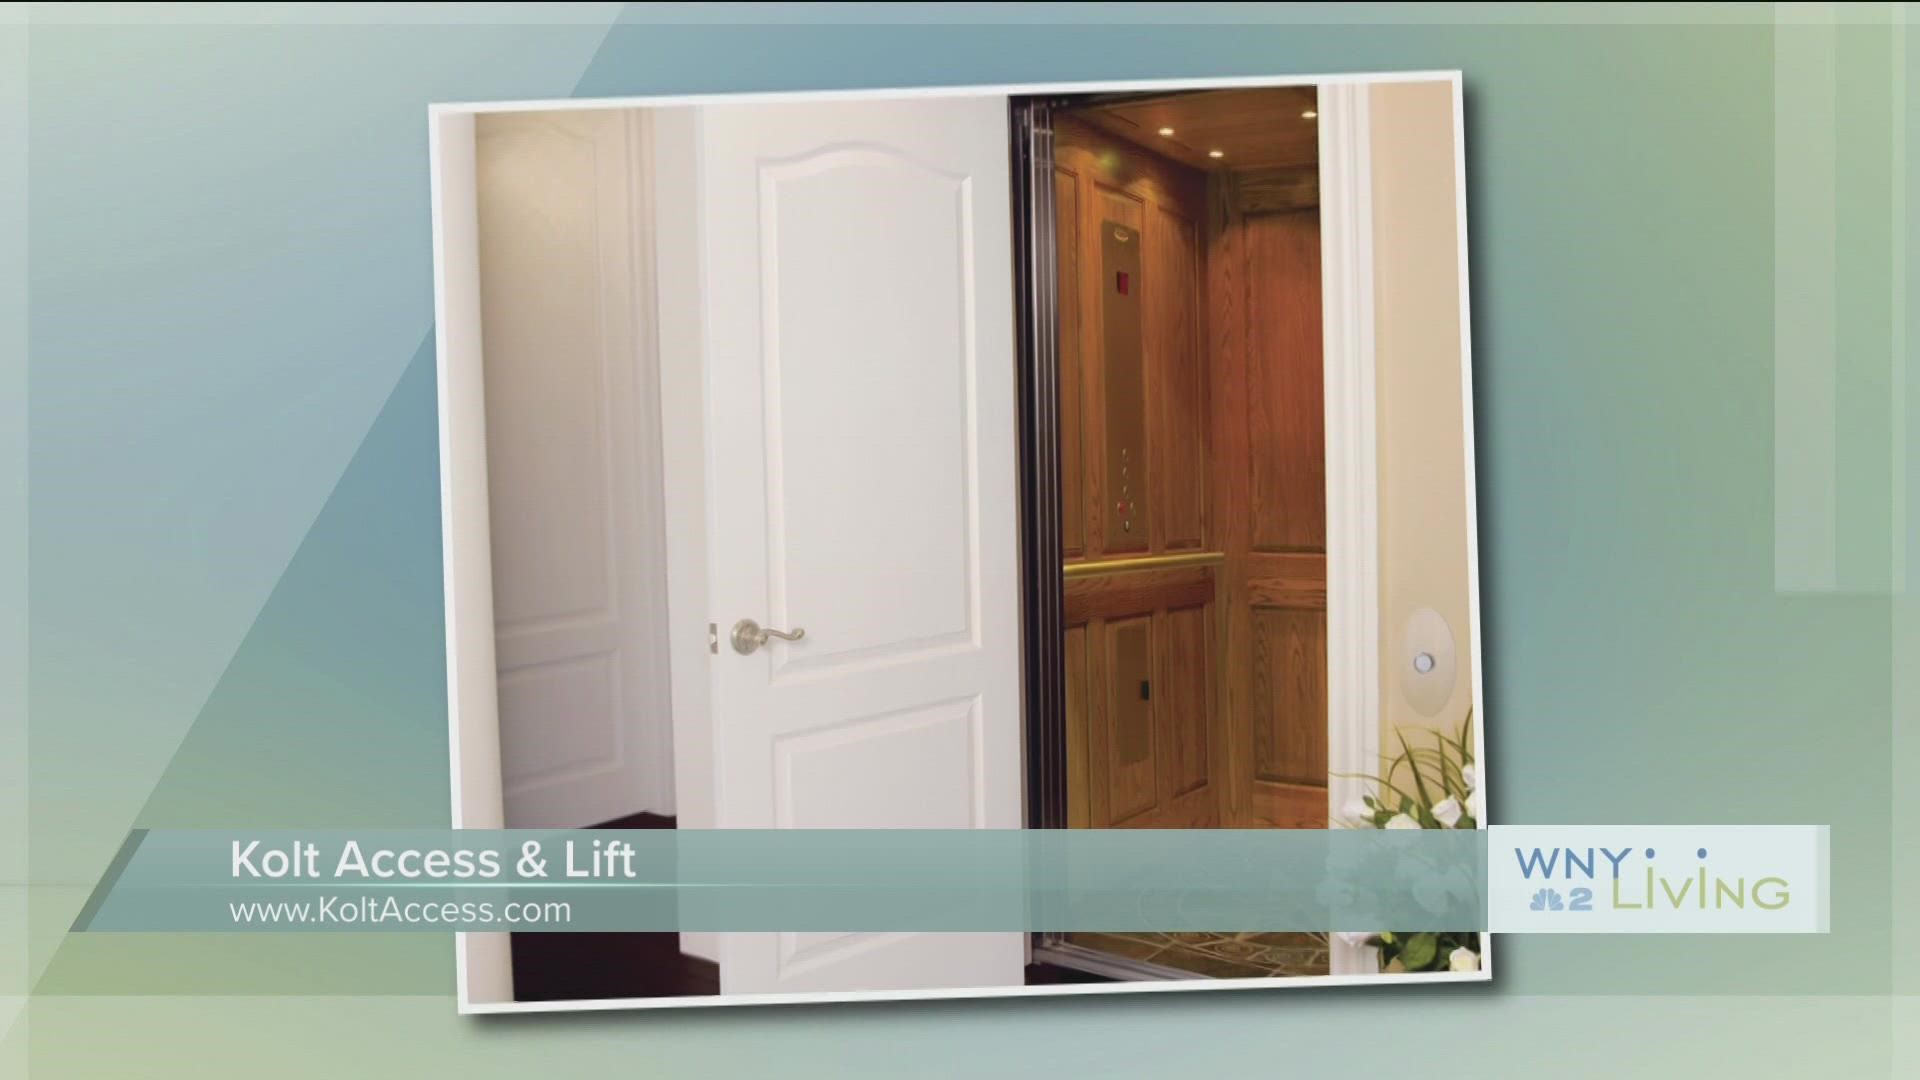 WNY Living - August 6 - Kolt Access & Lift (THIS VIDEO IS SPONSORED BY KOLT ACCESS & LIFT)